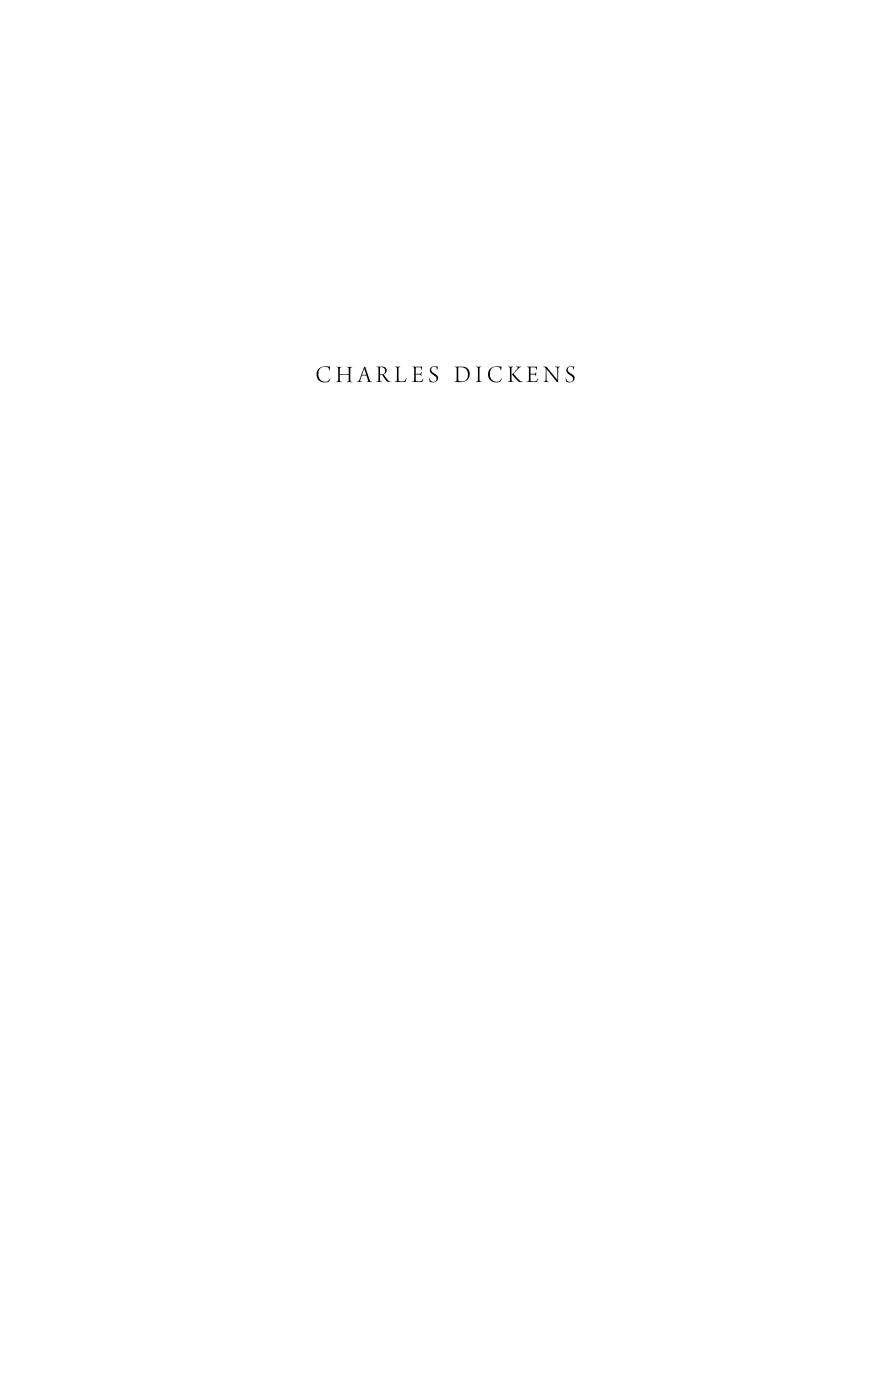 Charles Dickens by Michael Slater